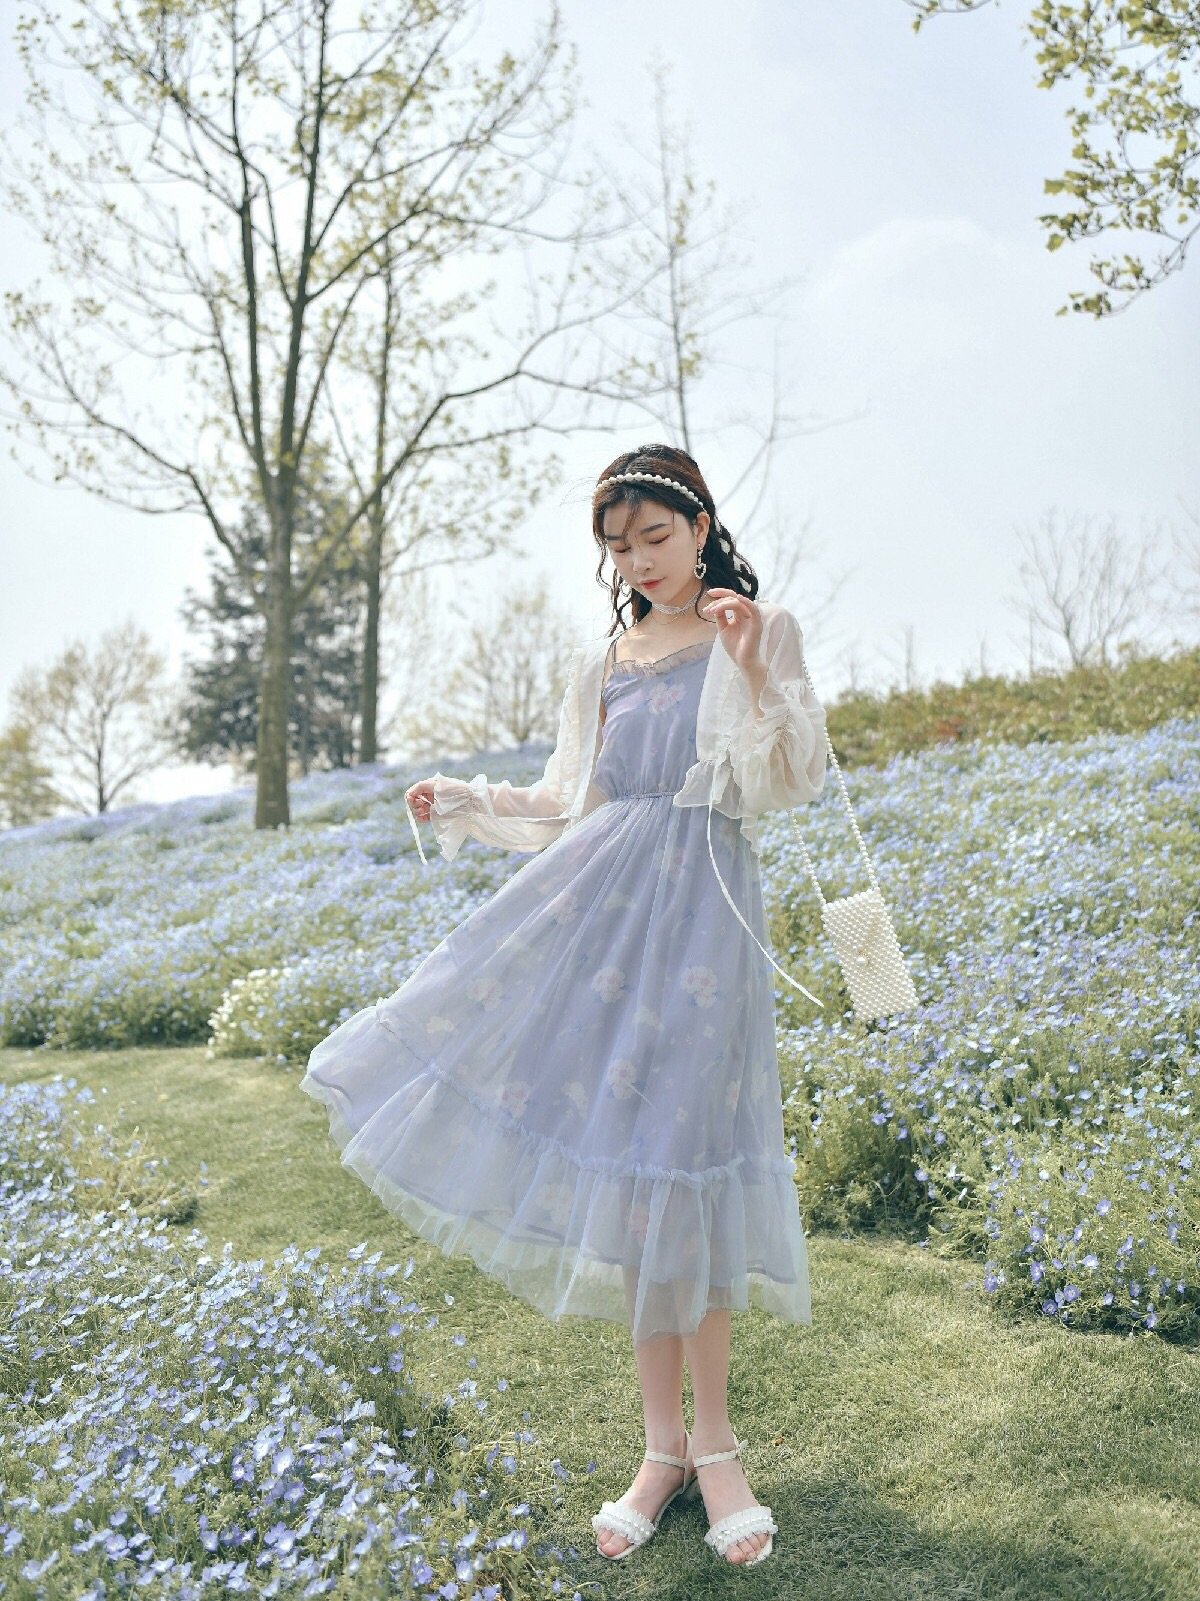 Flowery Sun Protection Outerwear & Dress-ntbhshop